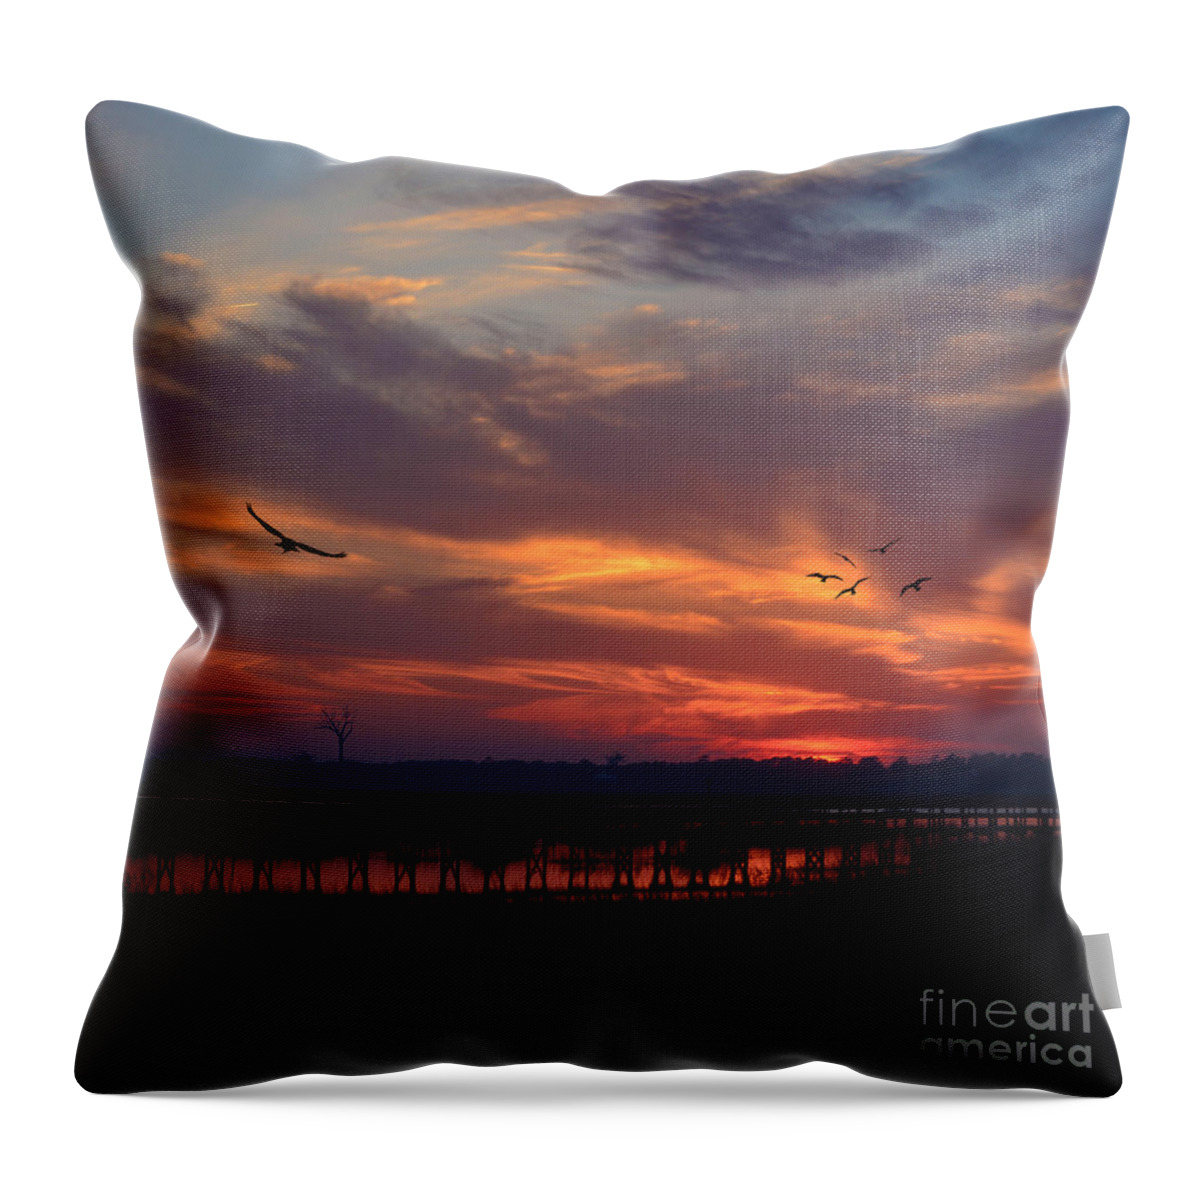 Throw Pillows Throw Pillow featuring the photograph Inlet Sunset Throw Pillow by Kathy Baccari